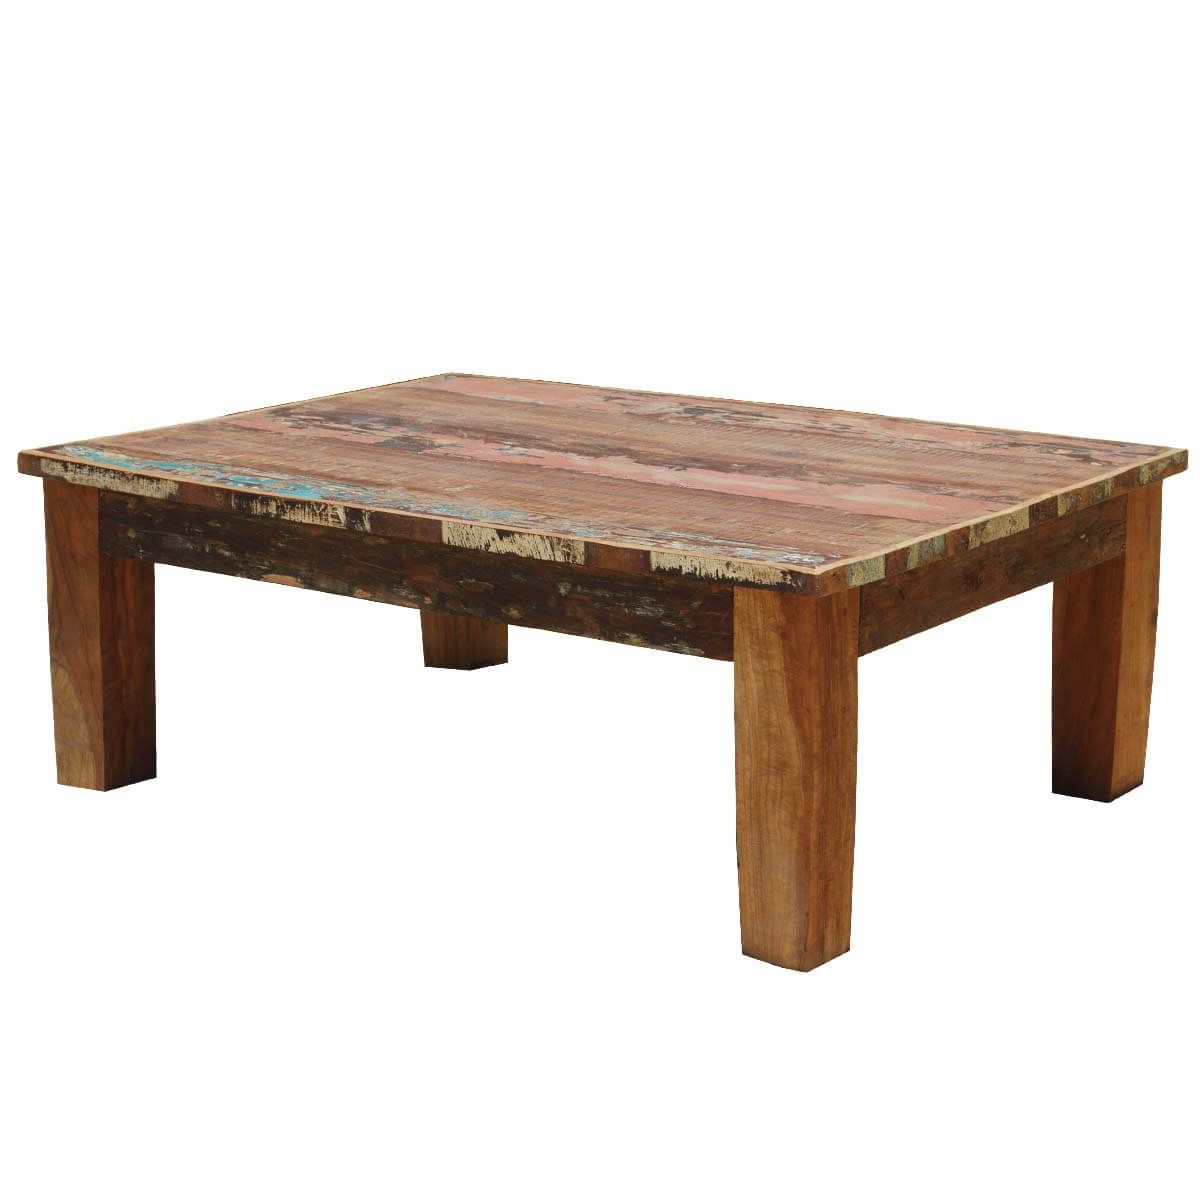 Culbertson Rustic Reclaimed Wood Rectangle Coffee Table Intended For Trendy Barnwood Coffee Tables (Gallery 12 of 20)